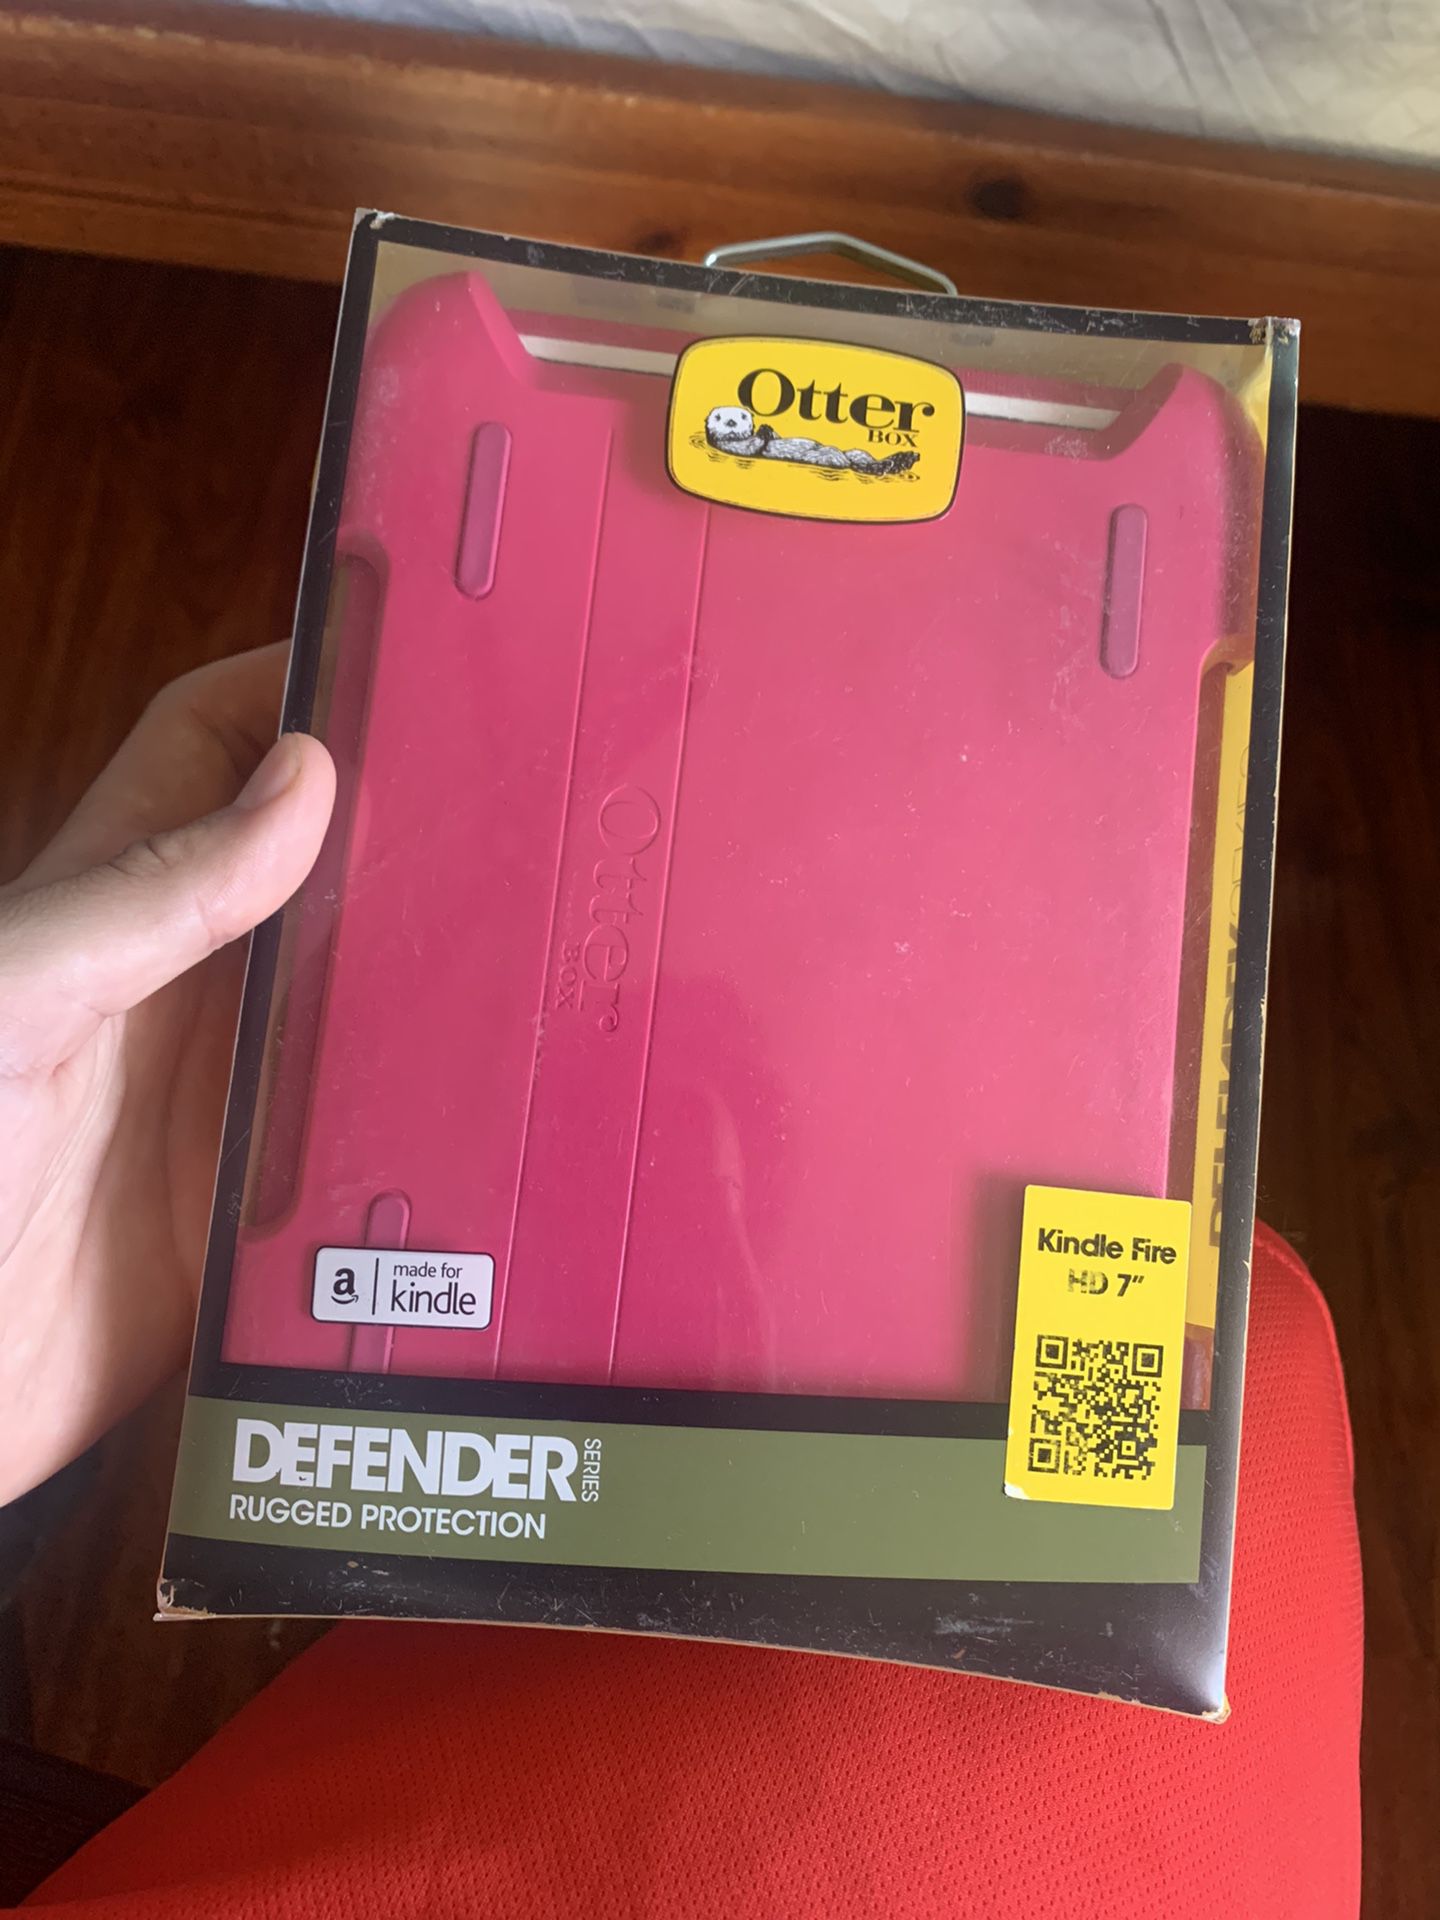 Otter Box Case for Kindle Fire HD 7”